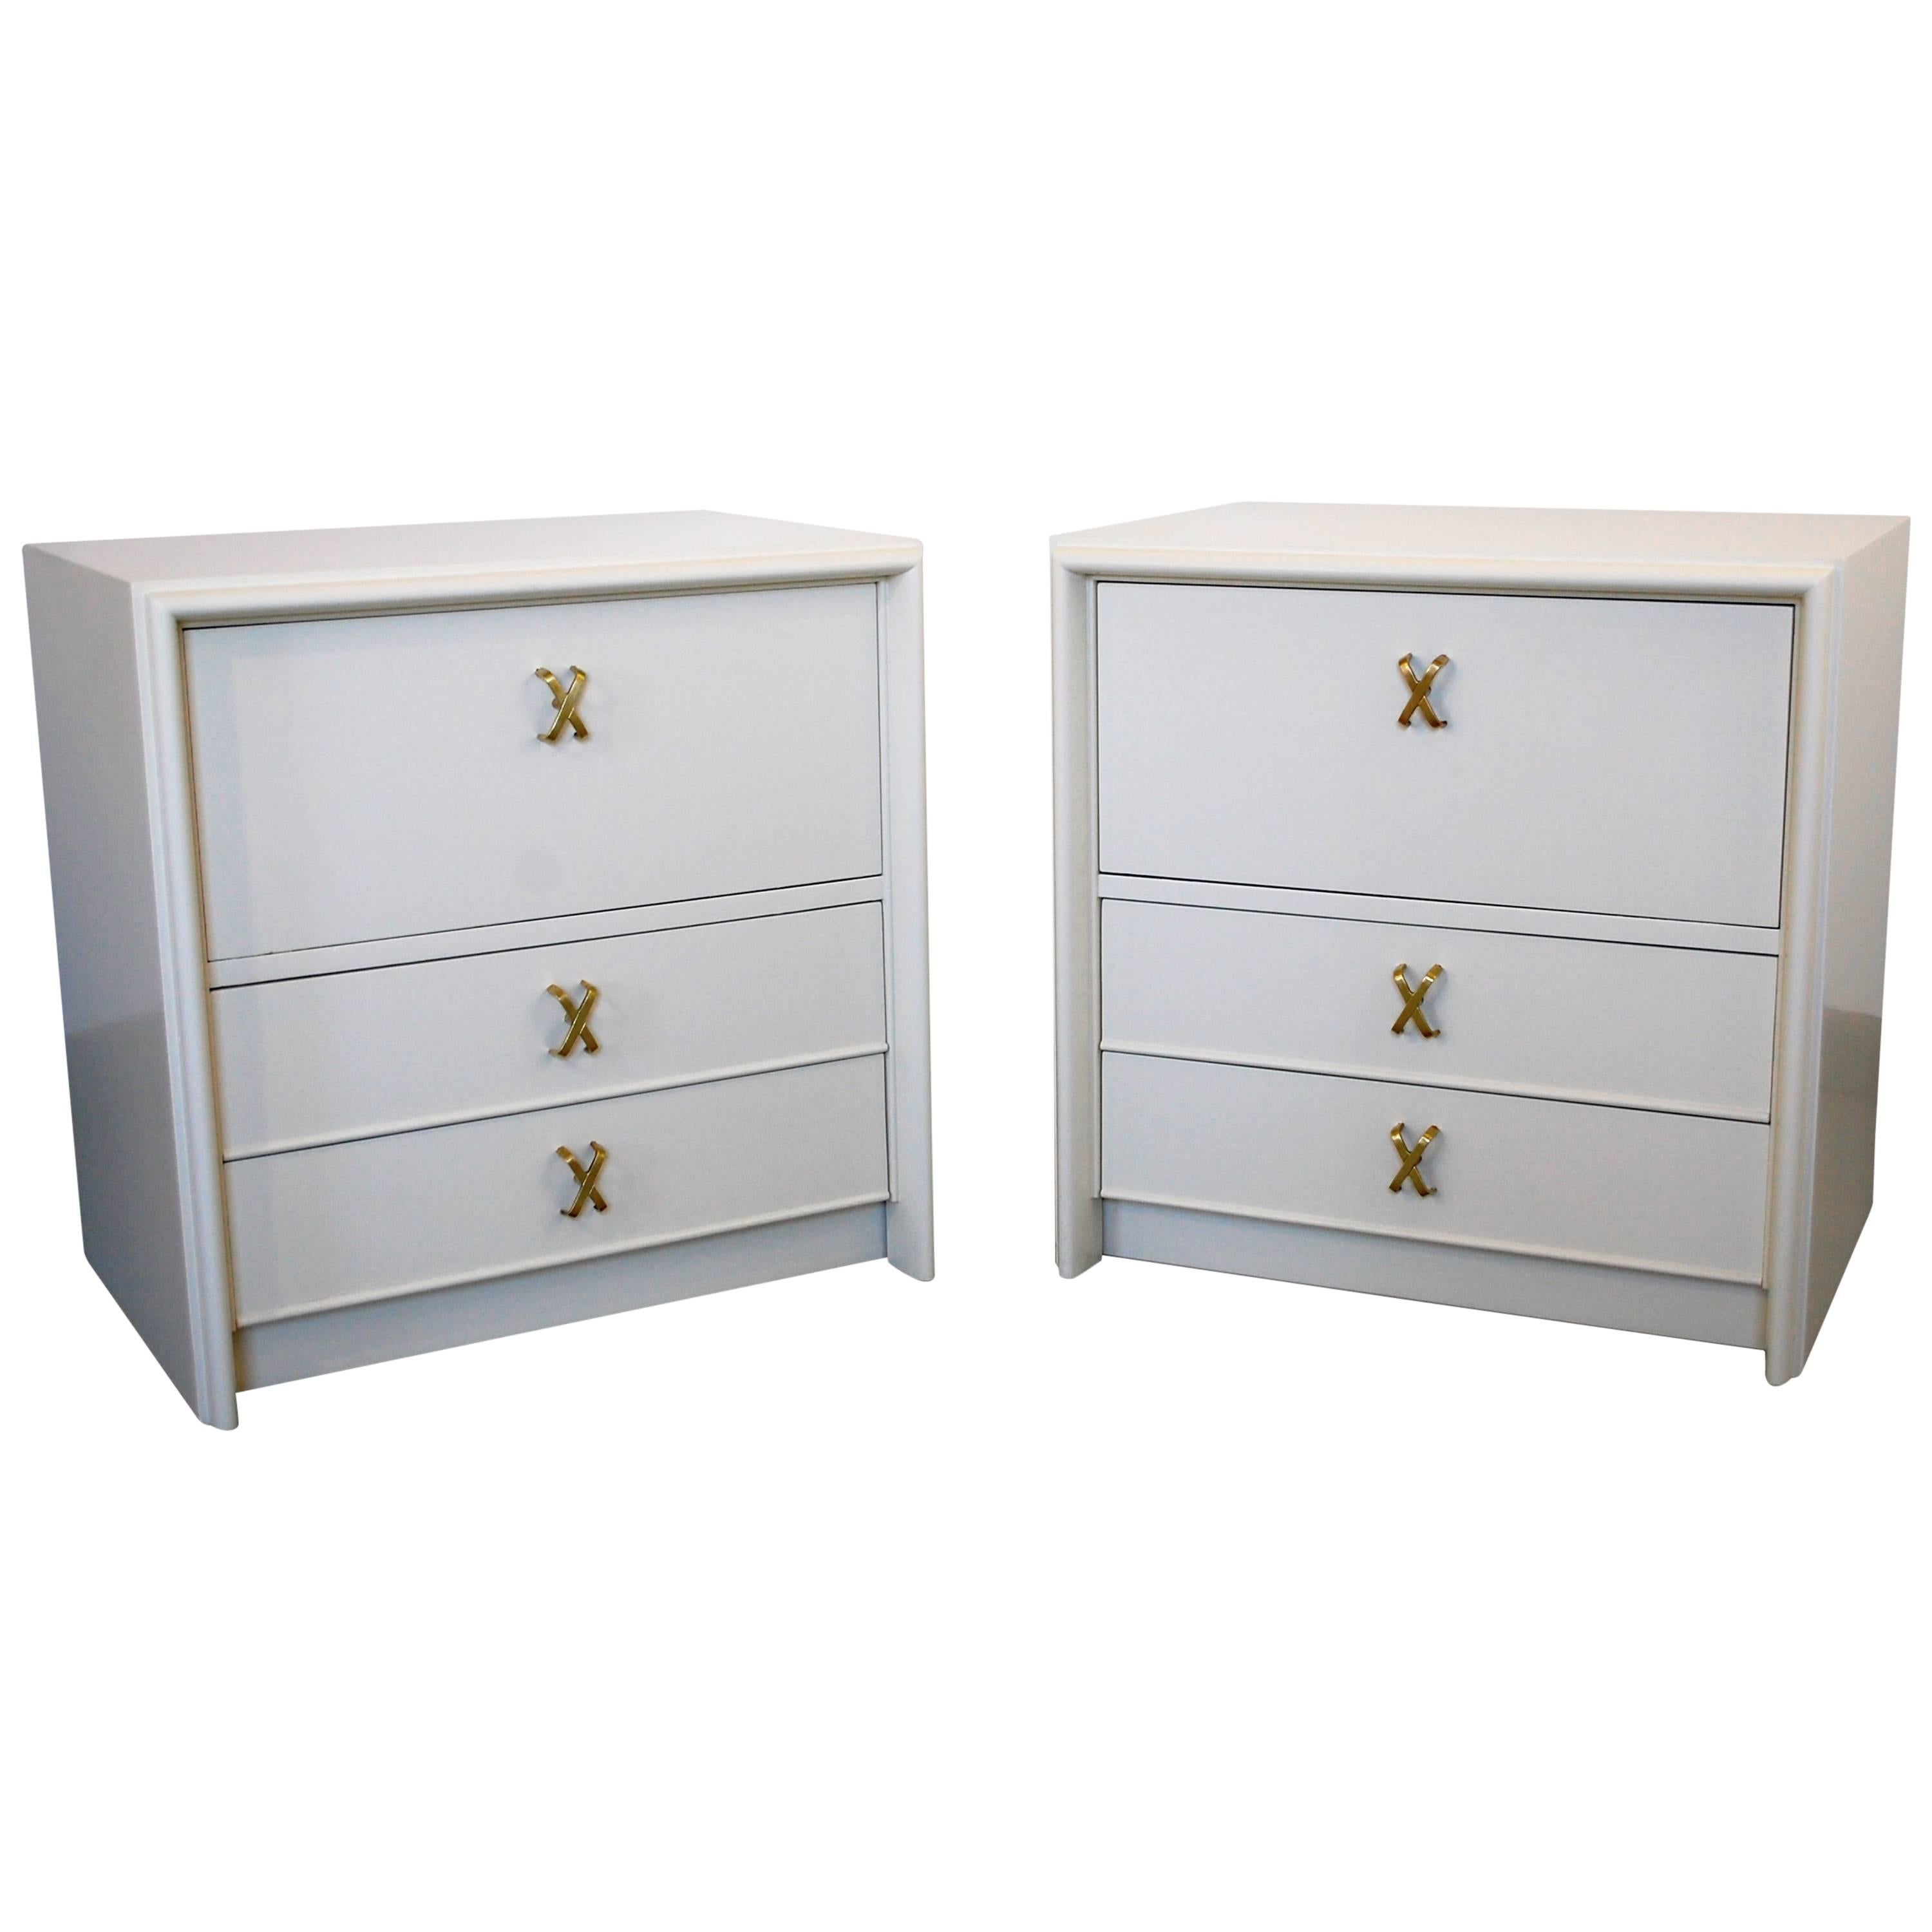 Stunning Pair of Paul Frankl Nightstands in Bone Lacquer